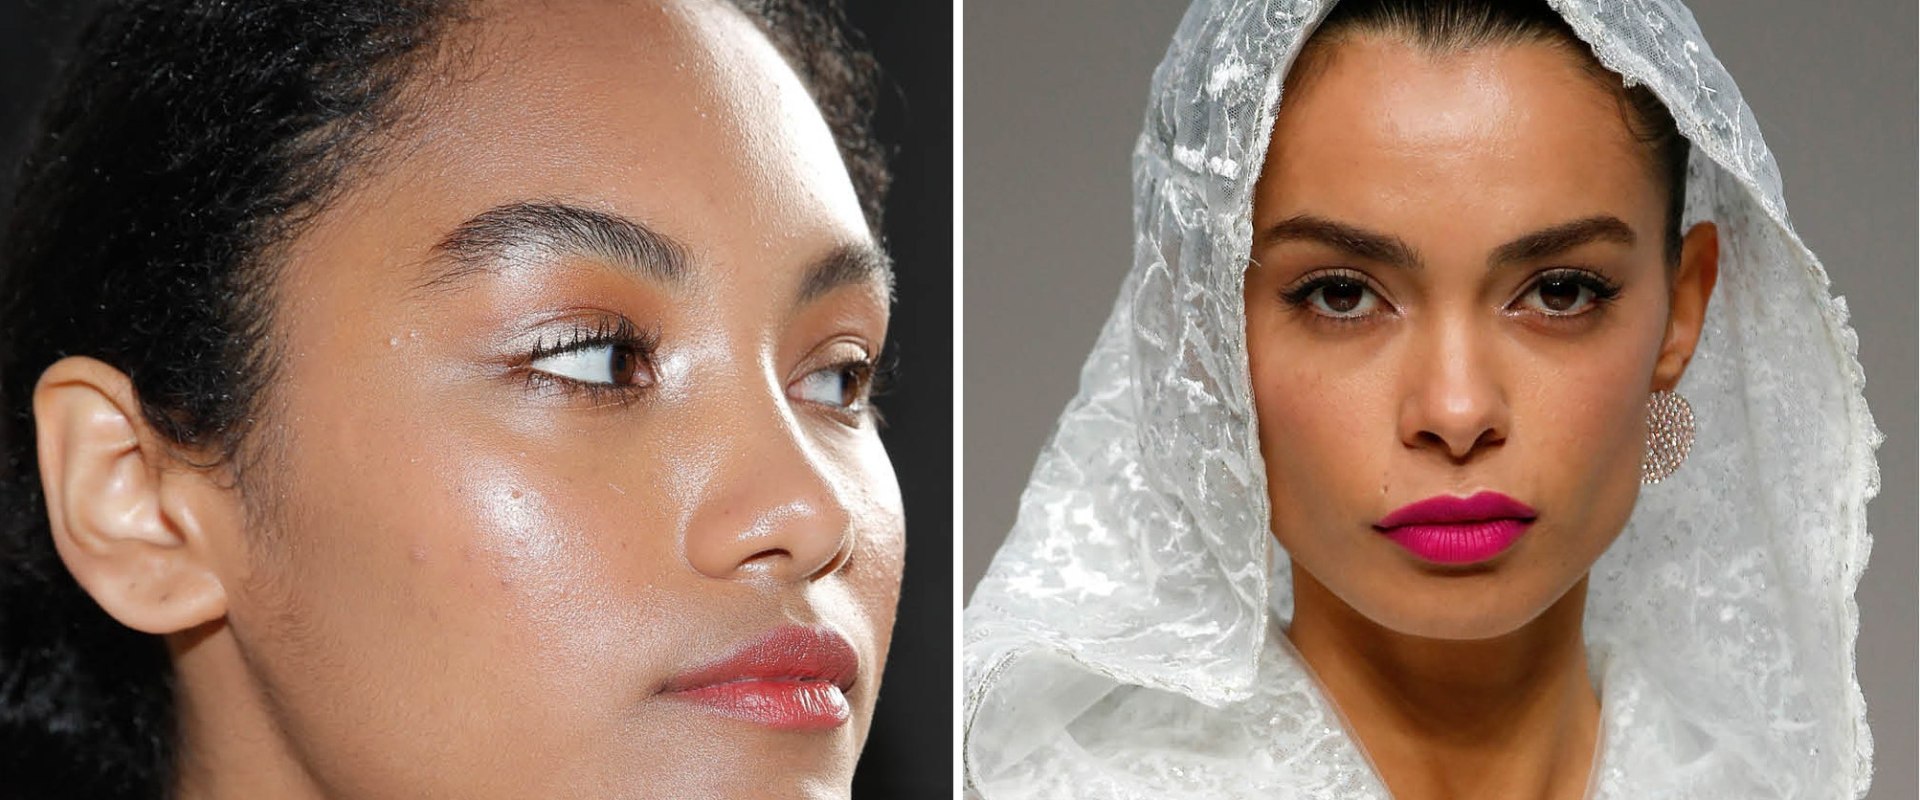 Highlighter and Bronzer for Brides: Achieve the Perfect Wedding Day Glow